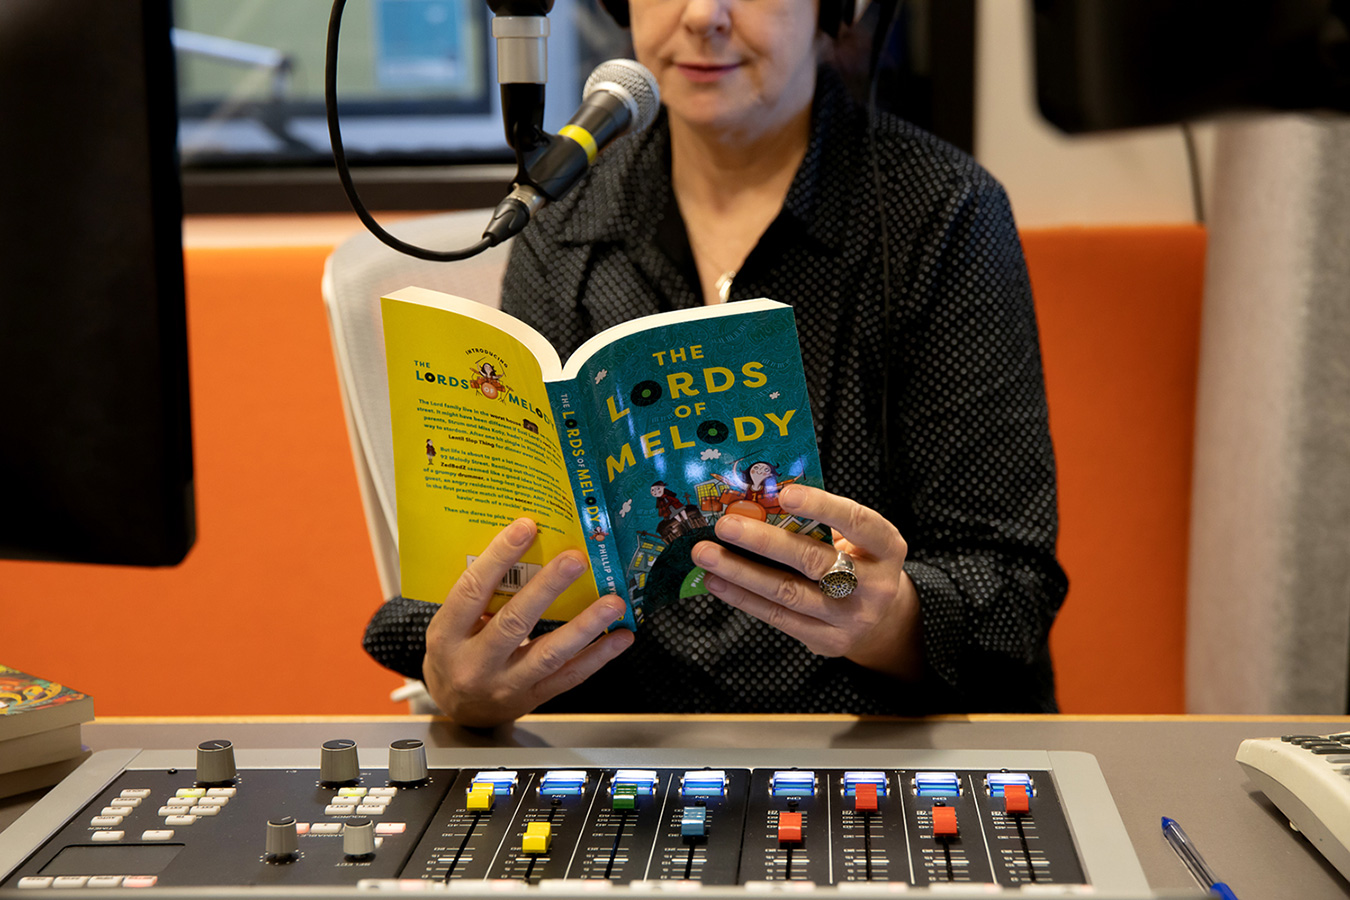 A woman in a black top sits at a desk with a microphone and an audio console in front of her. She is reading 'The Lords of Melody' by Phillip Gwynne